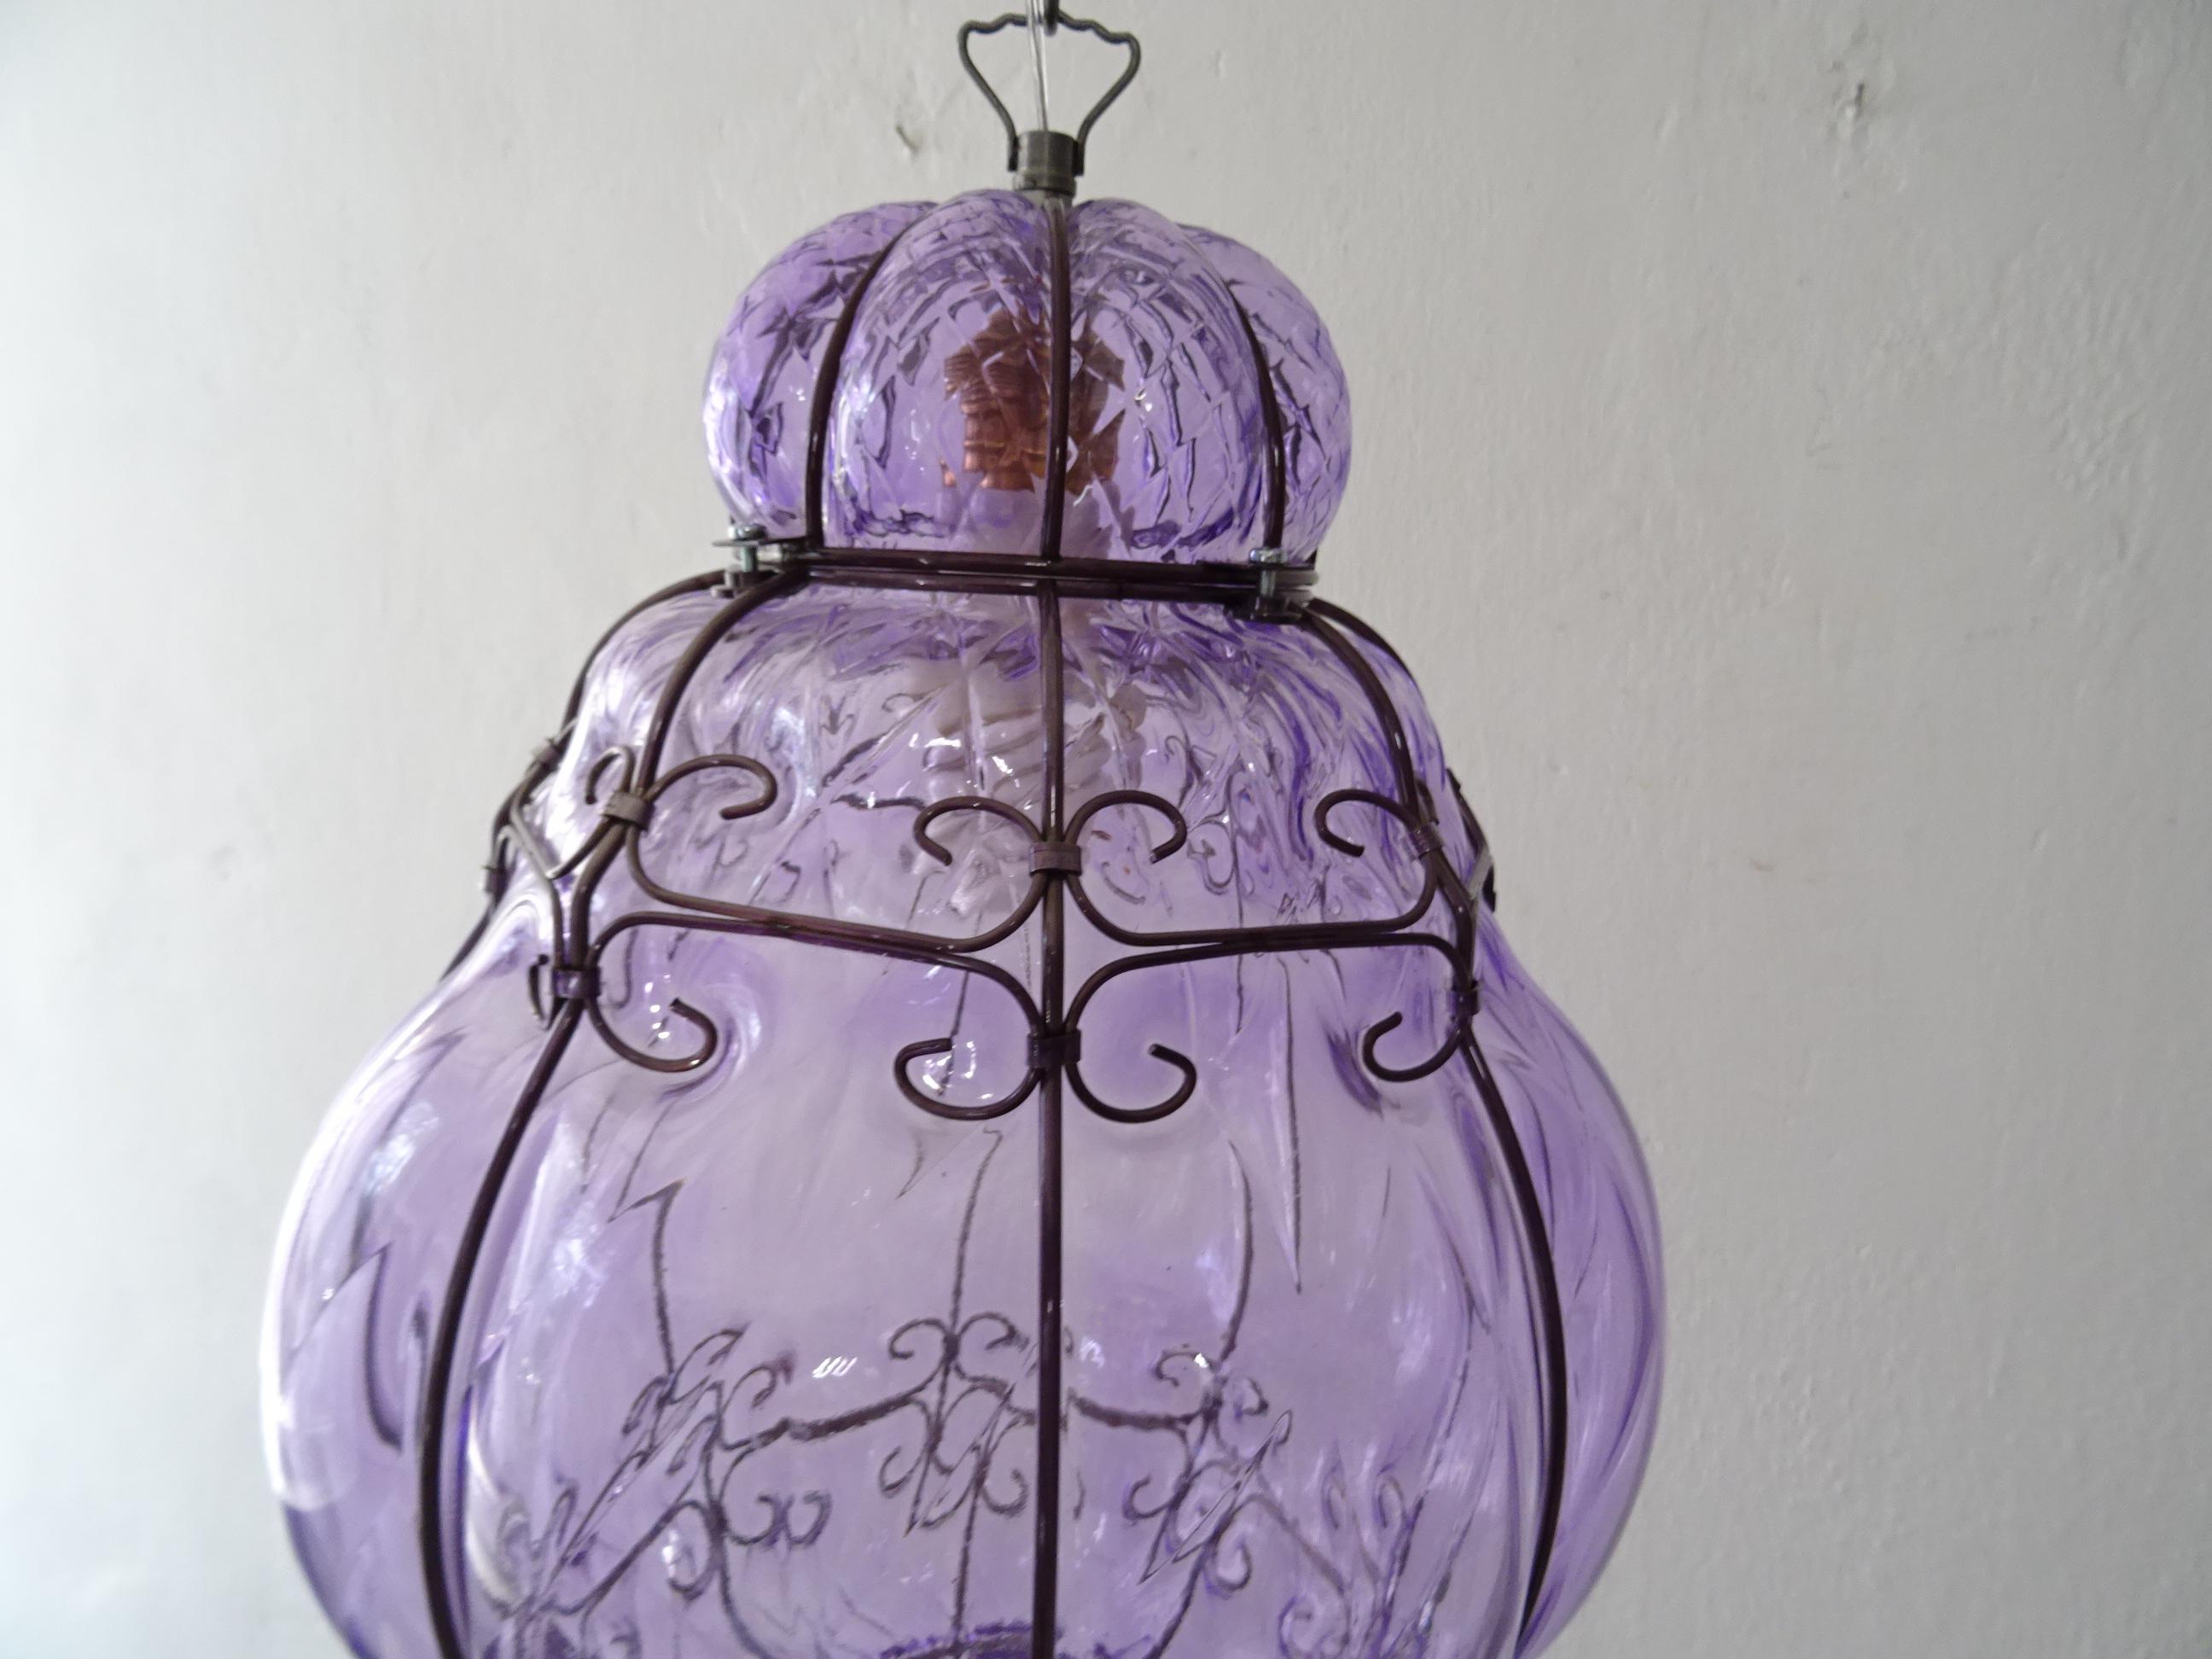 Housing one-light. Will be newly rewired with a certified UL US socket for the United States or appropriate socket for other countries and ready to hang. Rare big size and color of Lavender Murano blown glass in metal cage. Great craftsmanship.